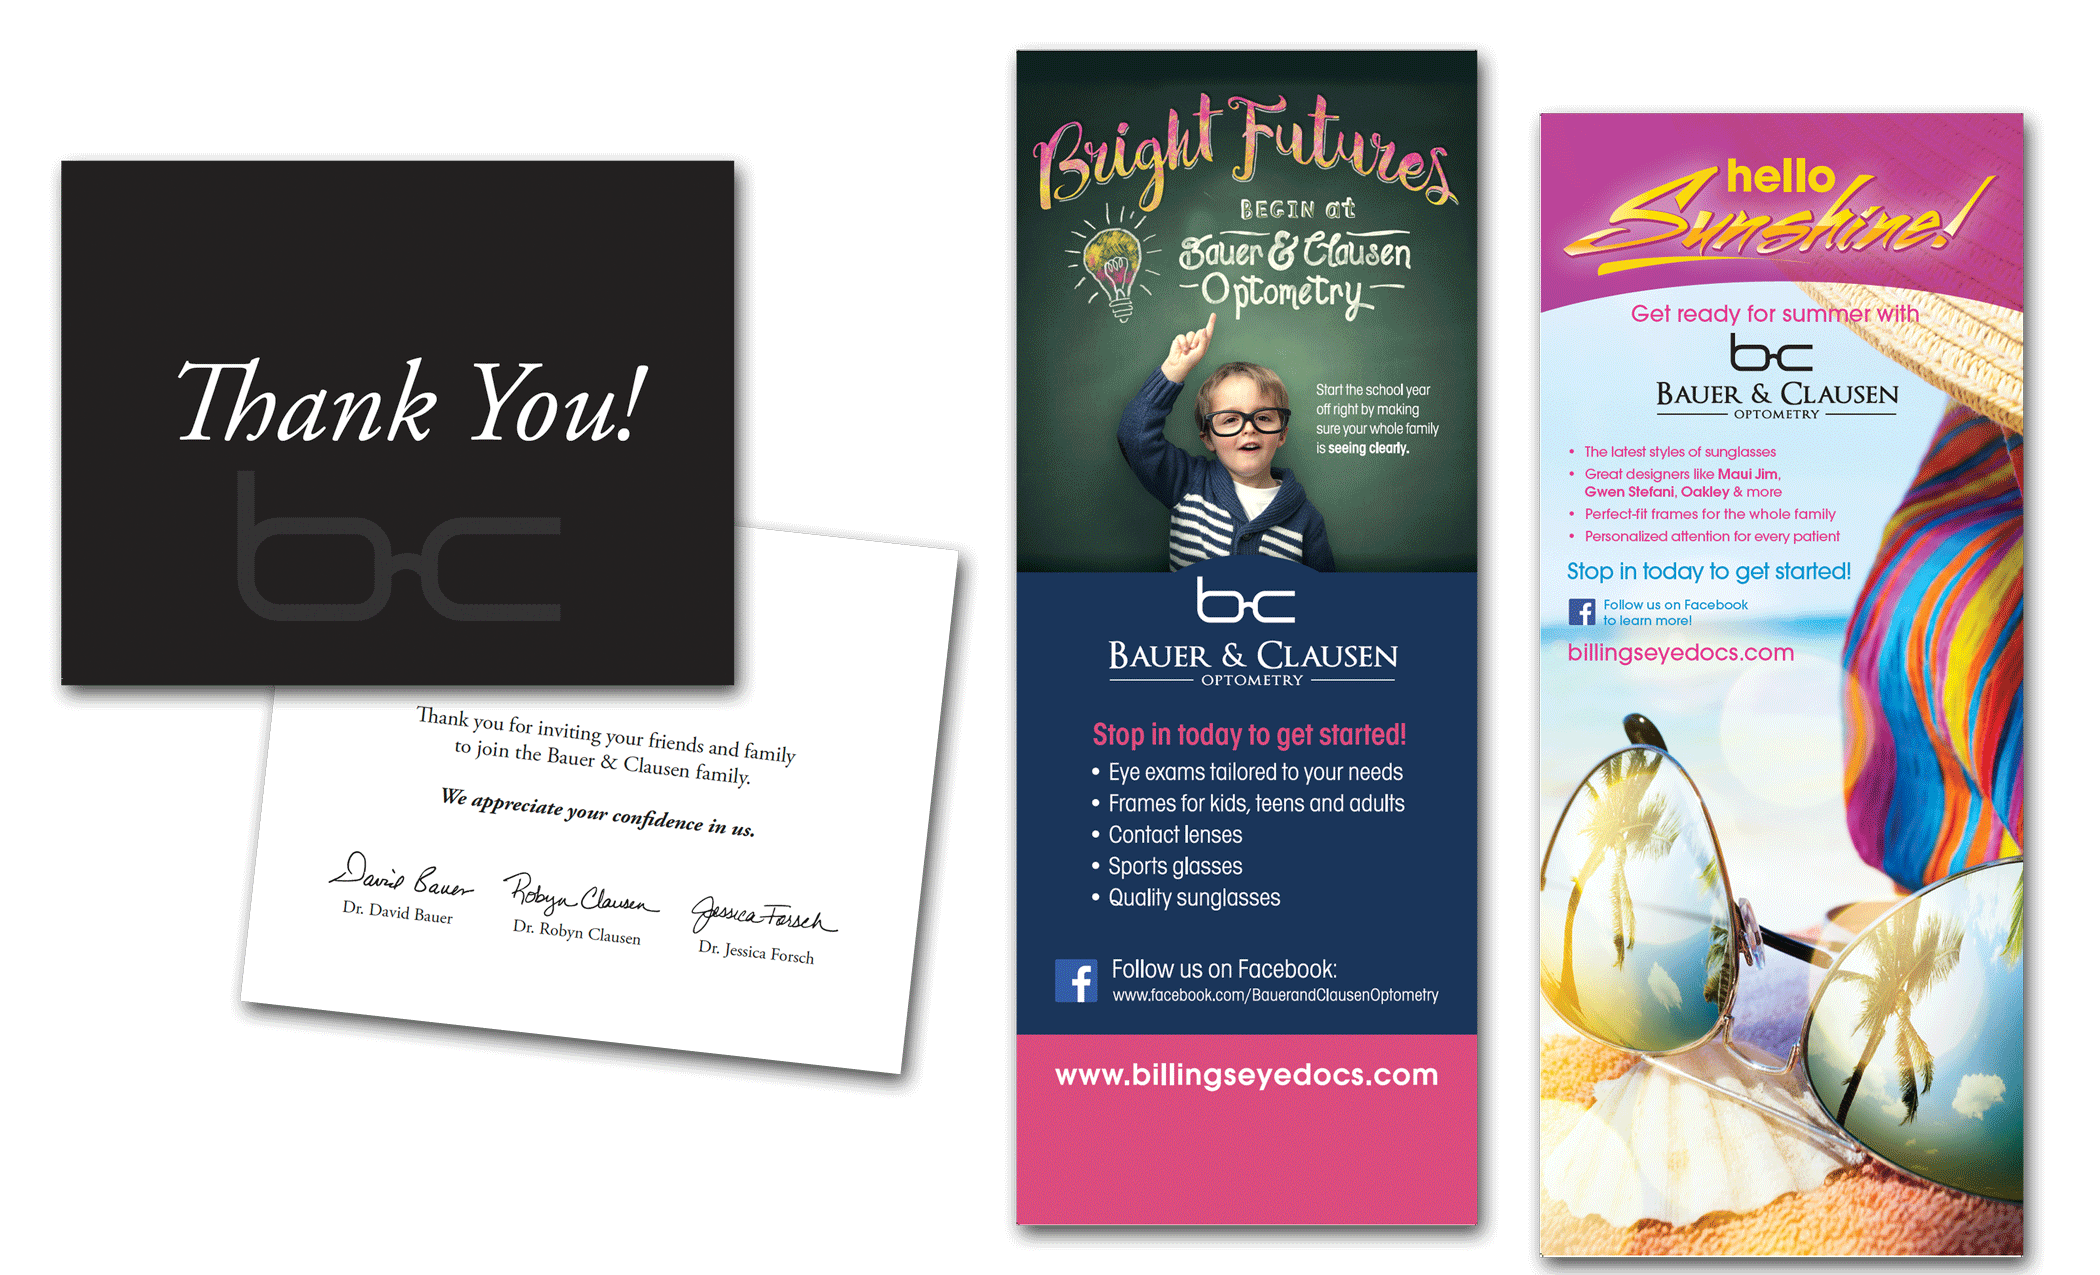 In-Office Banners and Thank You Notes for Bauer & Clausen Optometry